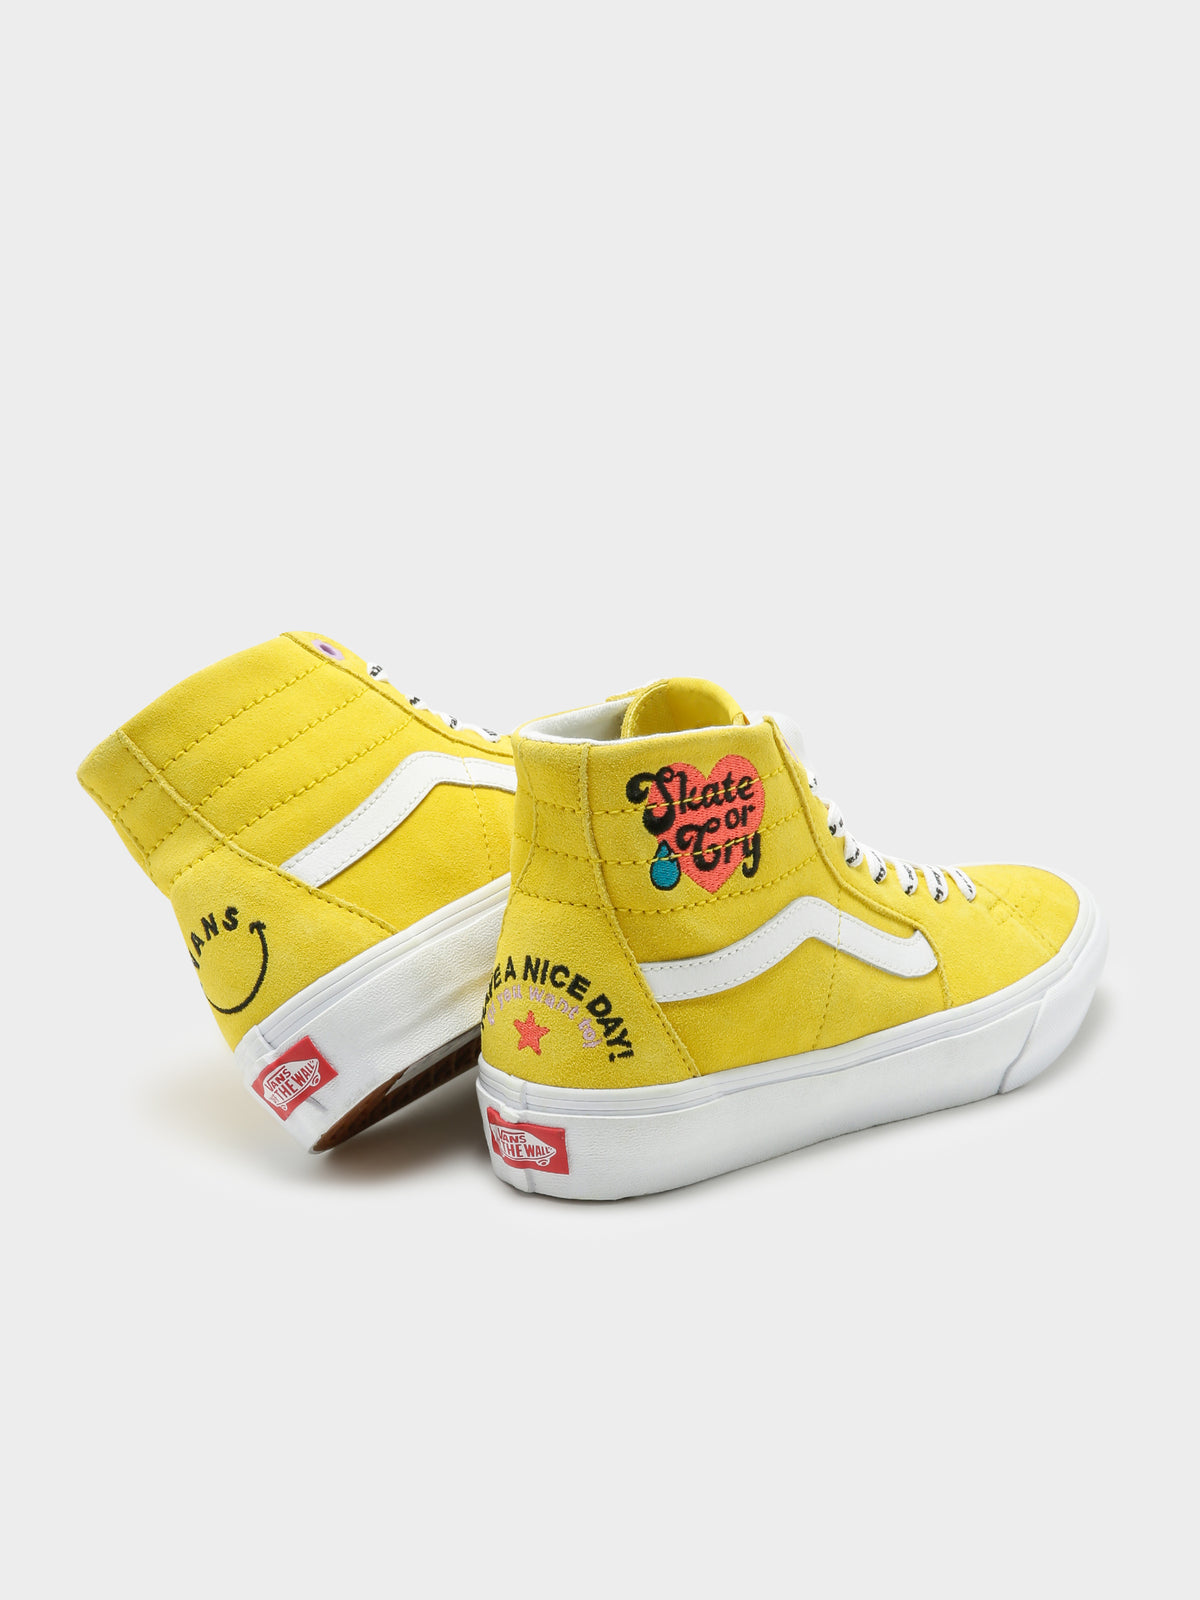 Unisex Sk8-Hi Tapered Sneakers in Radically Happy Yellow